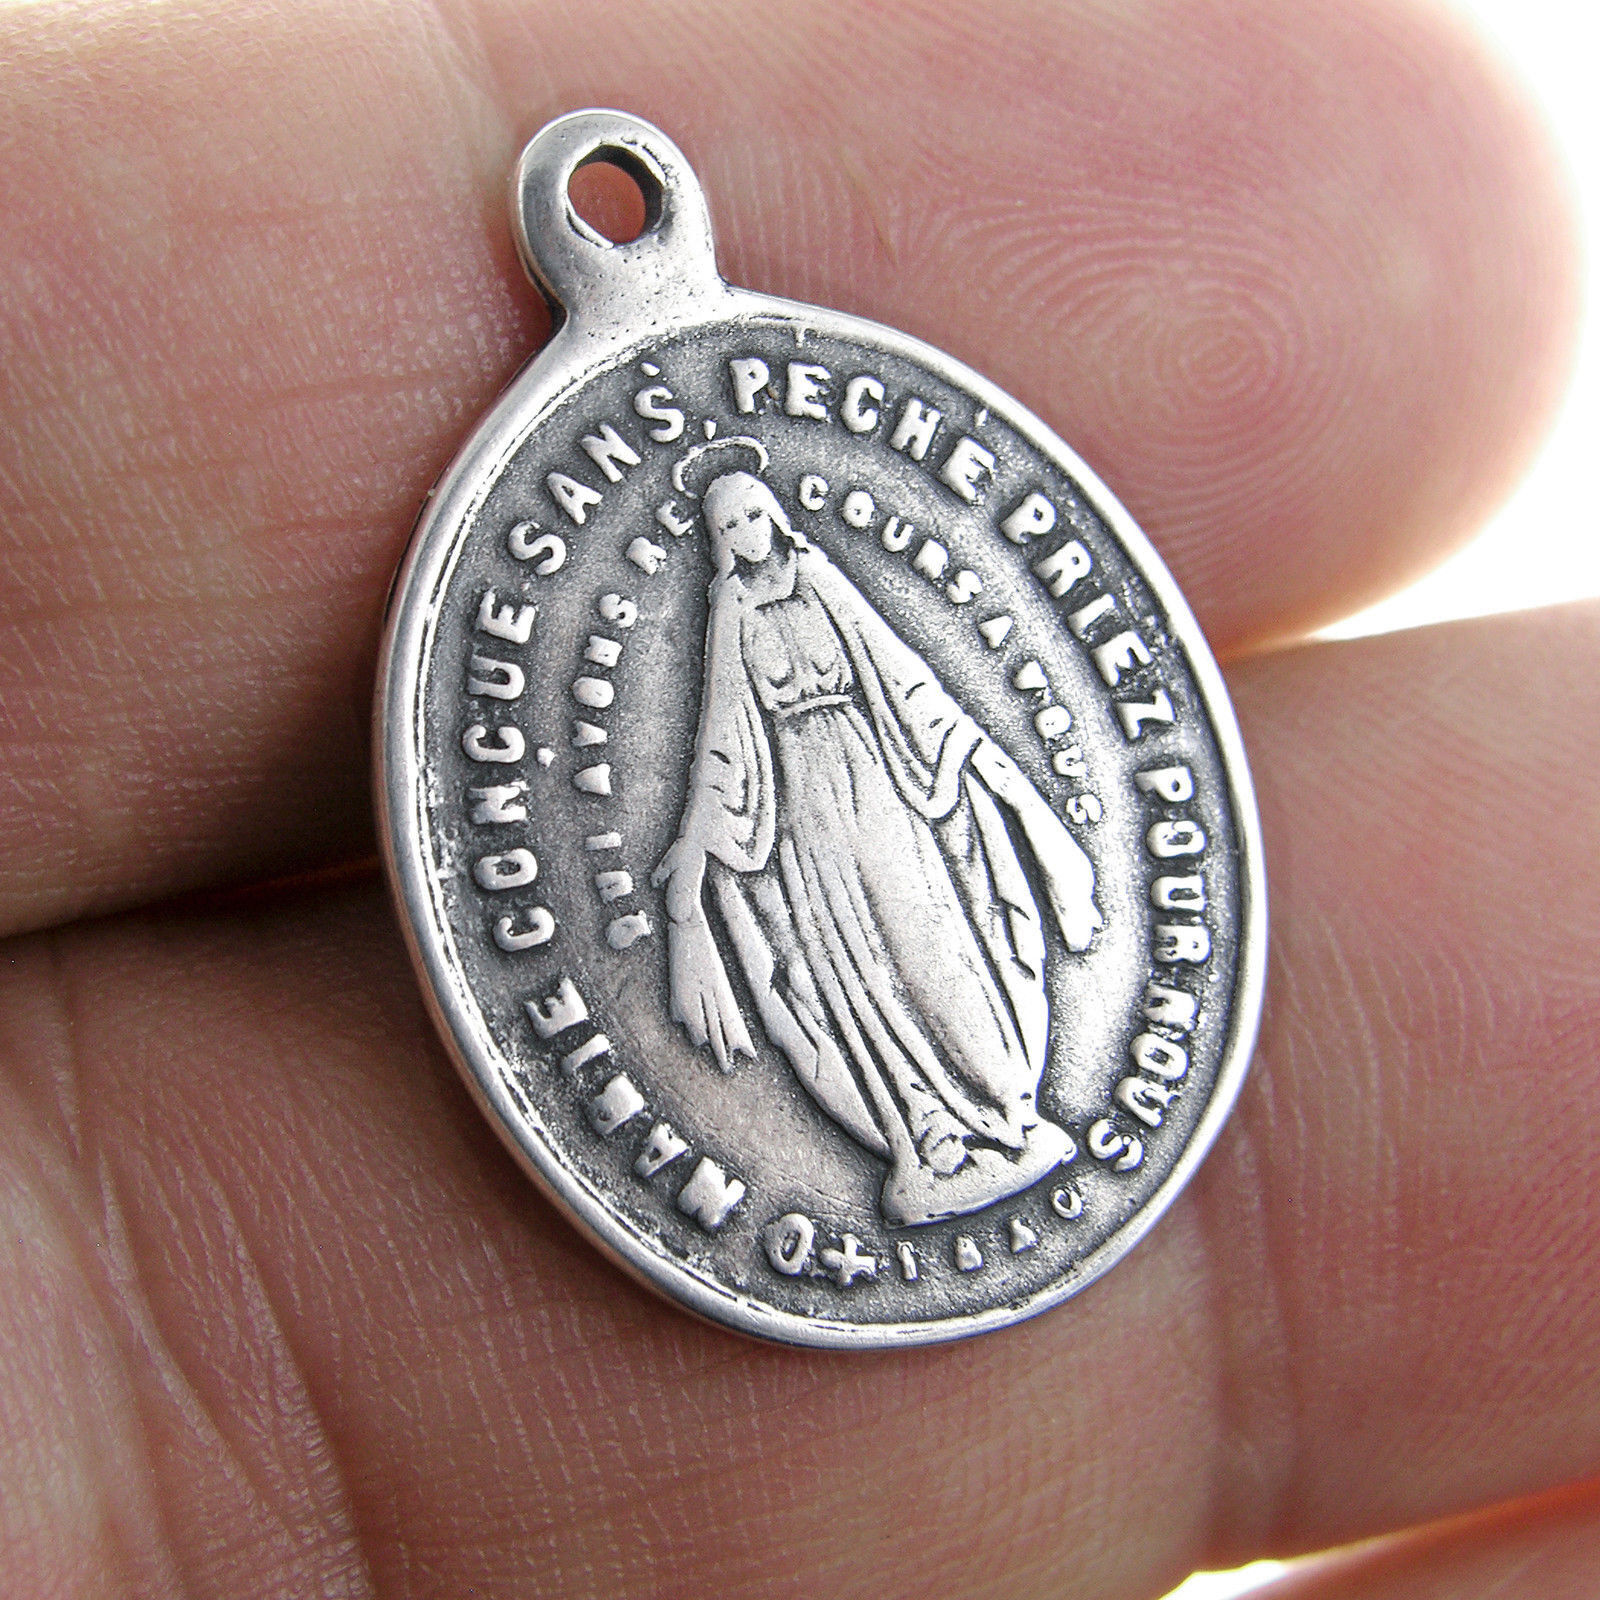 MIRACULOUS MEDAL silver, cast from 19th century antique French original